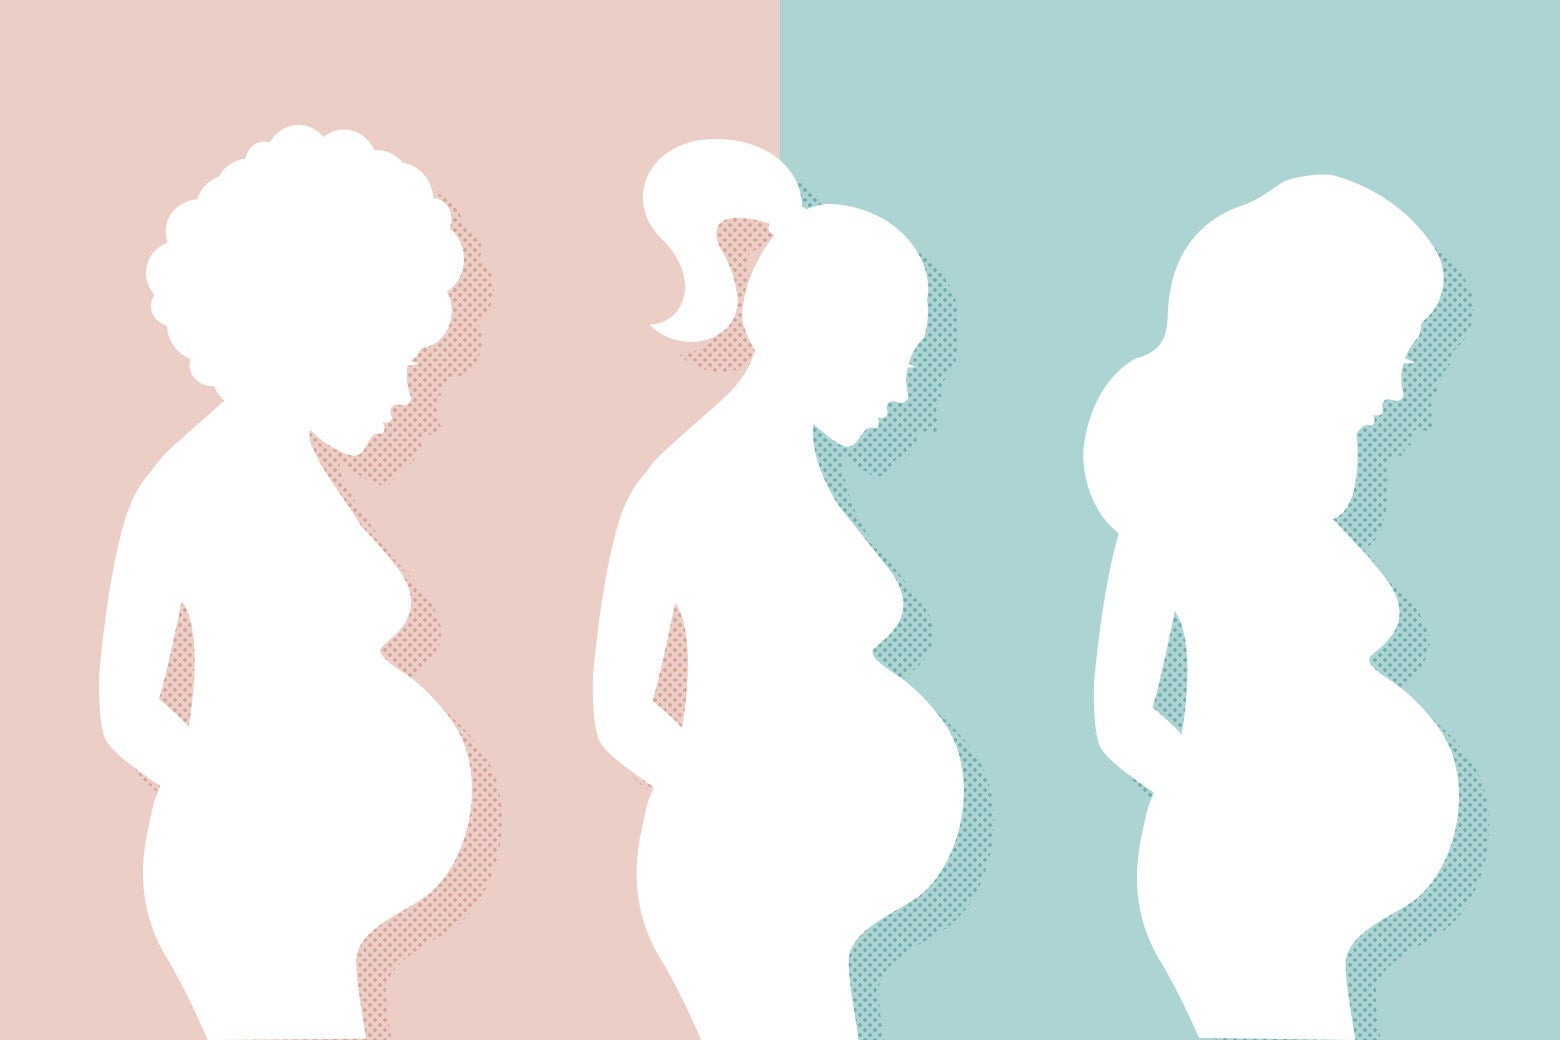 Silhouettes of three pregnant women looking down at and holding their bellies